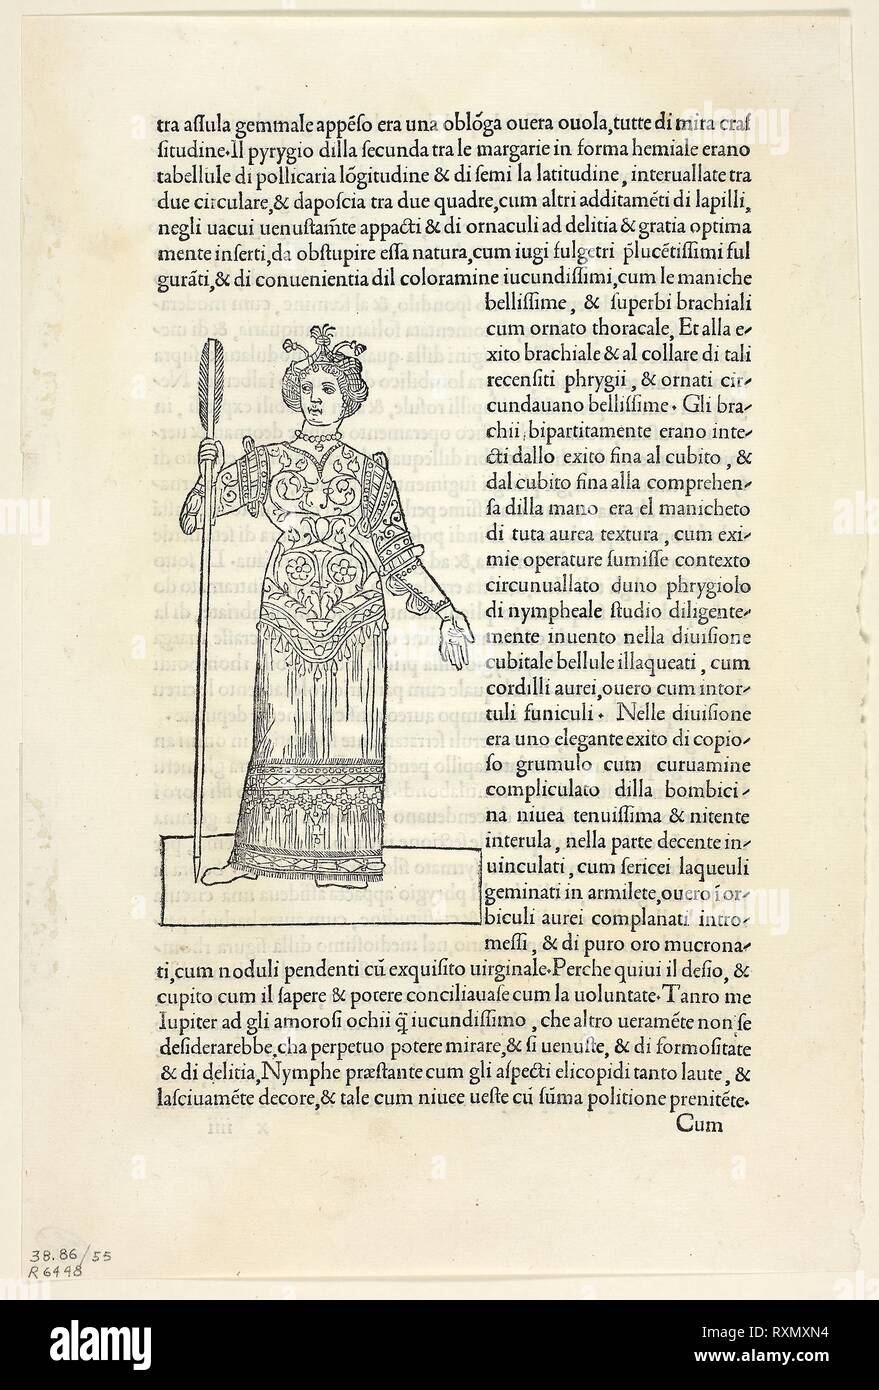 A Nymph from Hypnerotomachia Poliphili (The Strife of Love in a Dream), Plate 55 from Woodcuts from Books of the 15th Century. Unknown Artist (Venice, late 15th century); printed by Aldus Manutius (Italian, 1449-1515); commissioned by Leonardo Crasso (Italian, active c. 1499-1509); original text by Francesco Colonna (Italian, 1433/34-1527); portfolio text by Wilhelm Ludwig Schreiber (German, 1855-1932). Date: 1499. Dimensions: 134 x 71 mm (image); 281 x 188 mm (sheet). Woodcut in black, and letterpress in black (recto and verso), on cream laid paper, tipped onto cream wove paper mat. Origin: I Stock Photo